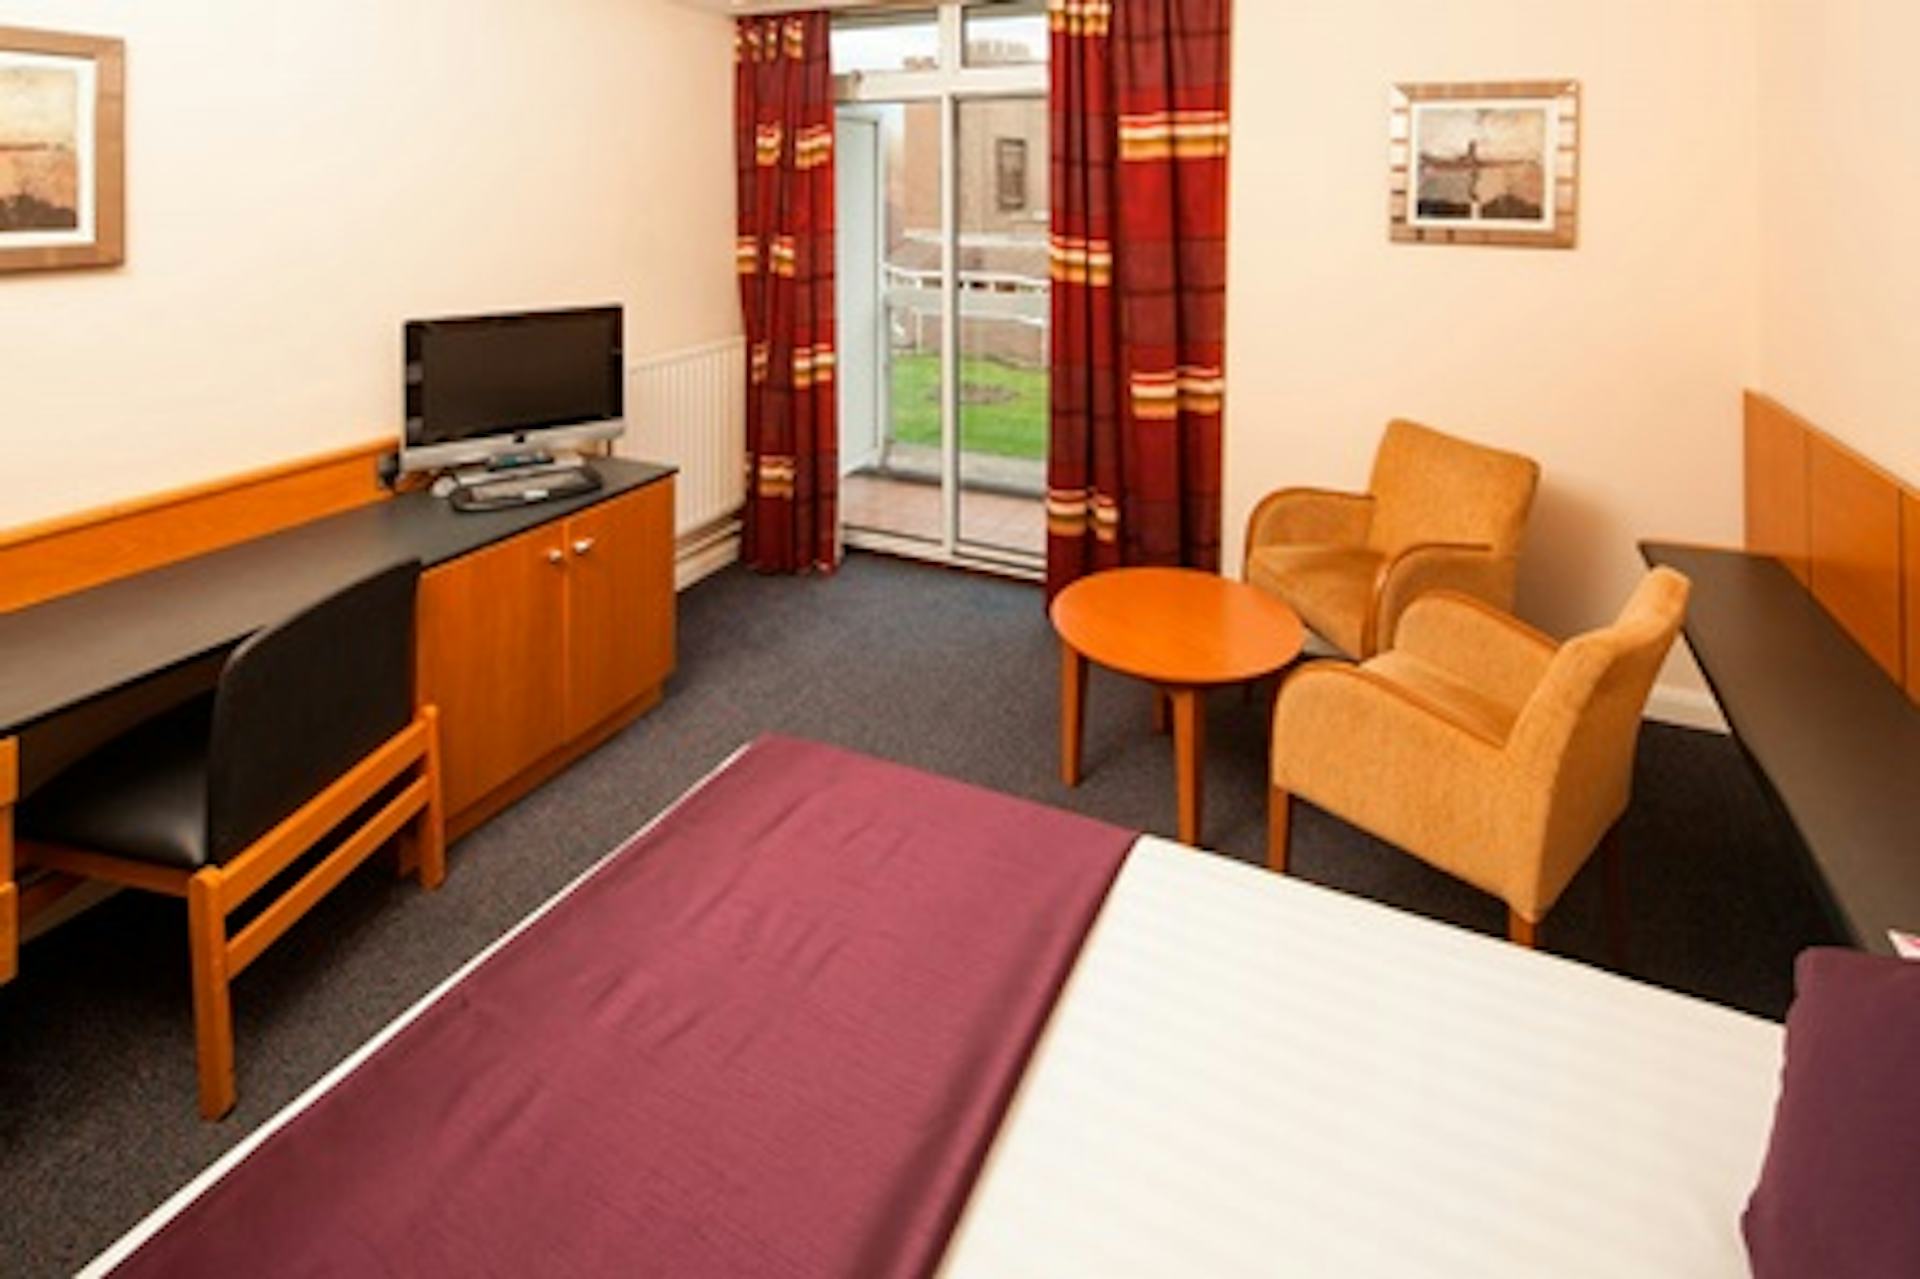 Two Night Break for Two at the Leeds Parkway Hotel